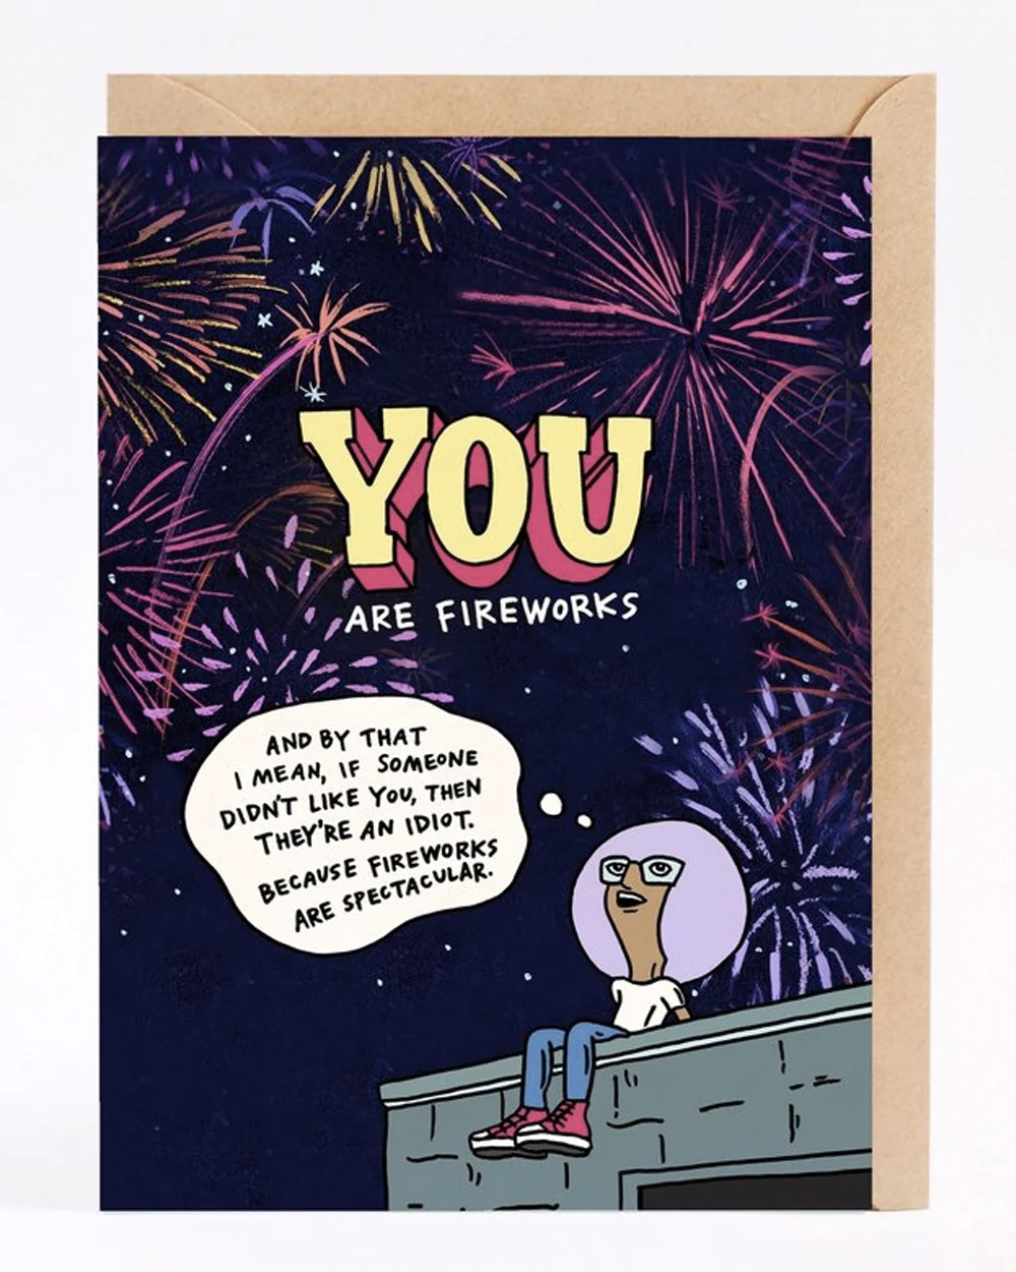 Wally Gift Card - “…Fireworks”